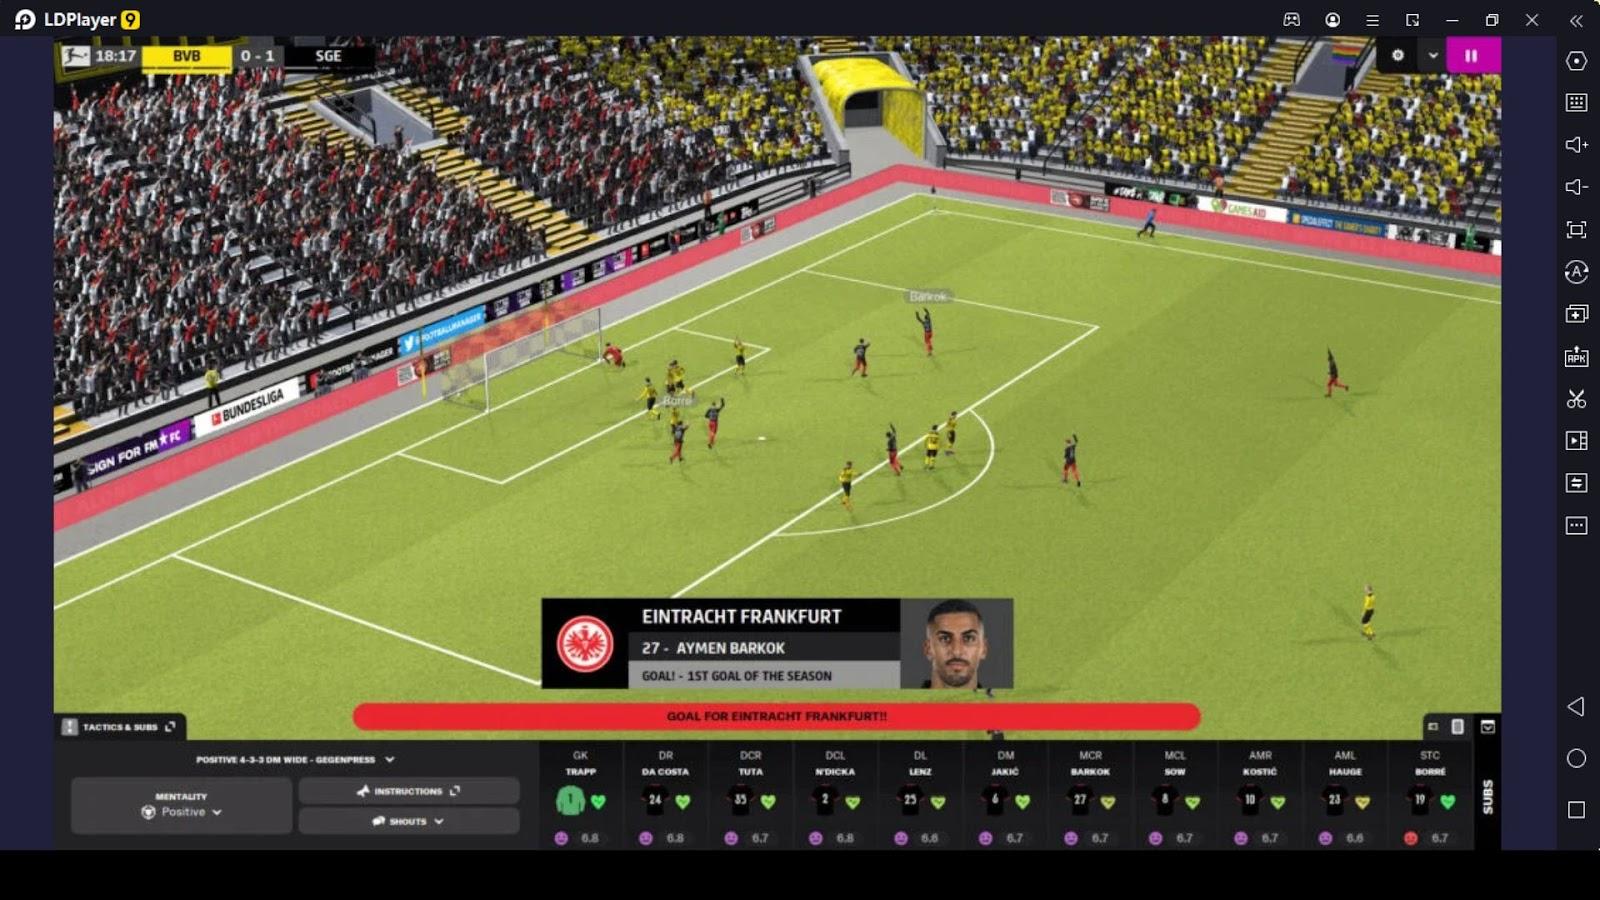 Best football games for Android: FIFA Mobile, eFootball 2023, Football  Manager 2023 Mobile, and more